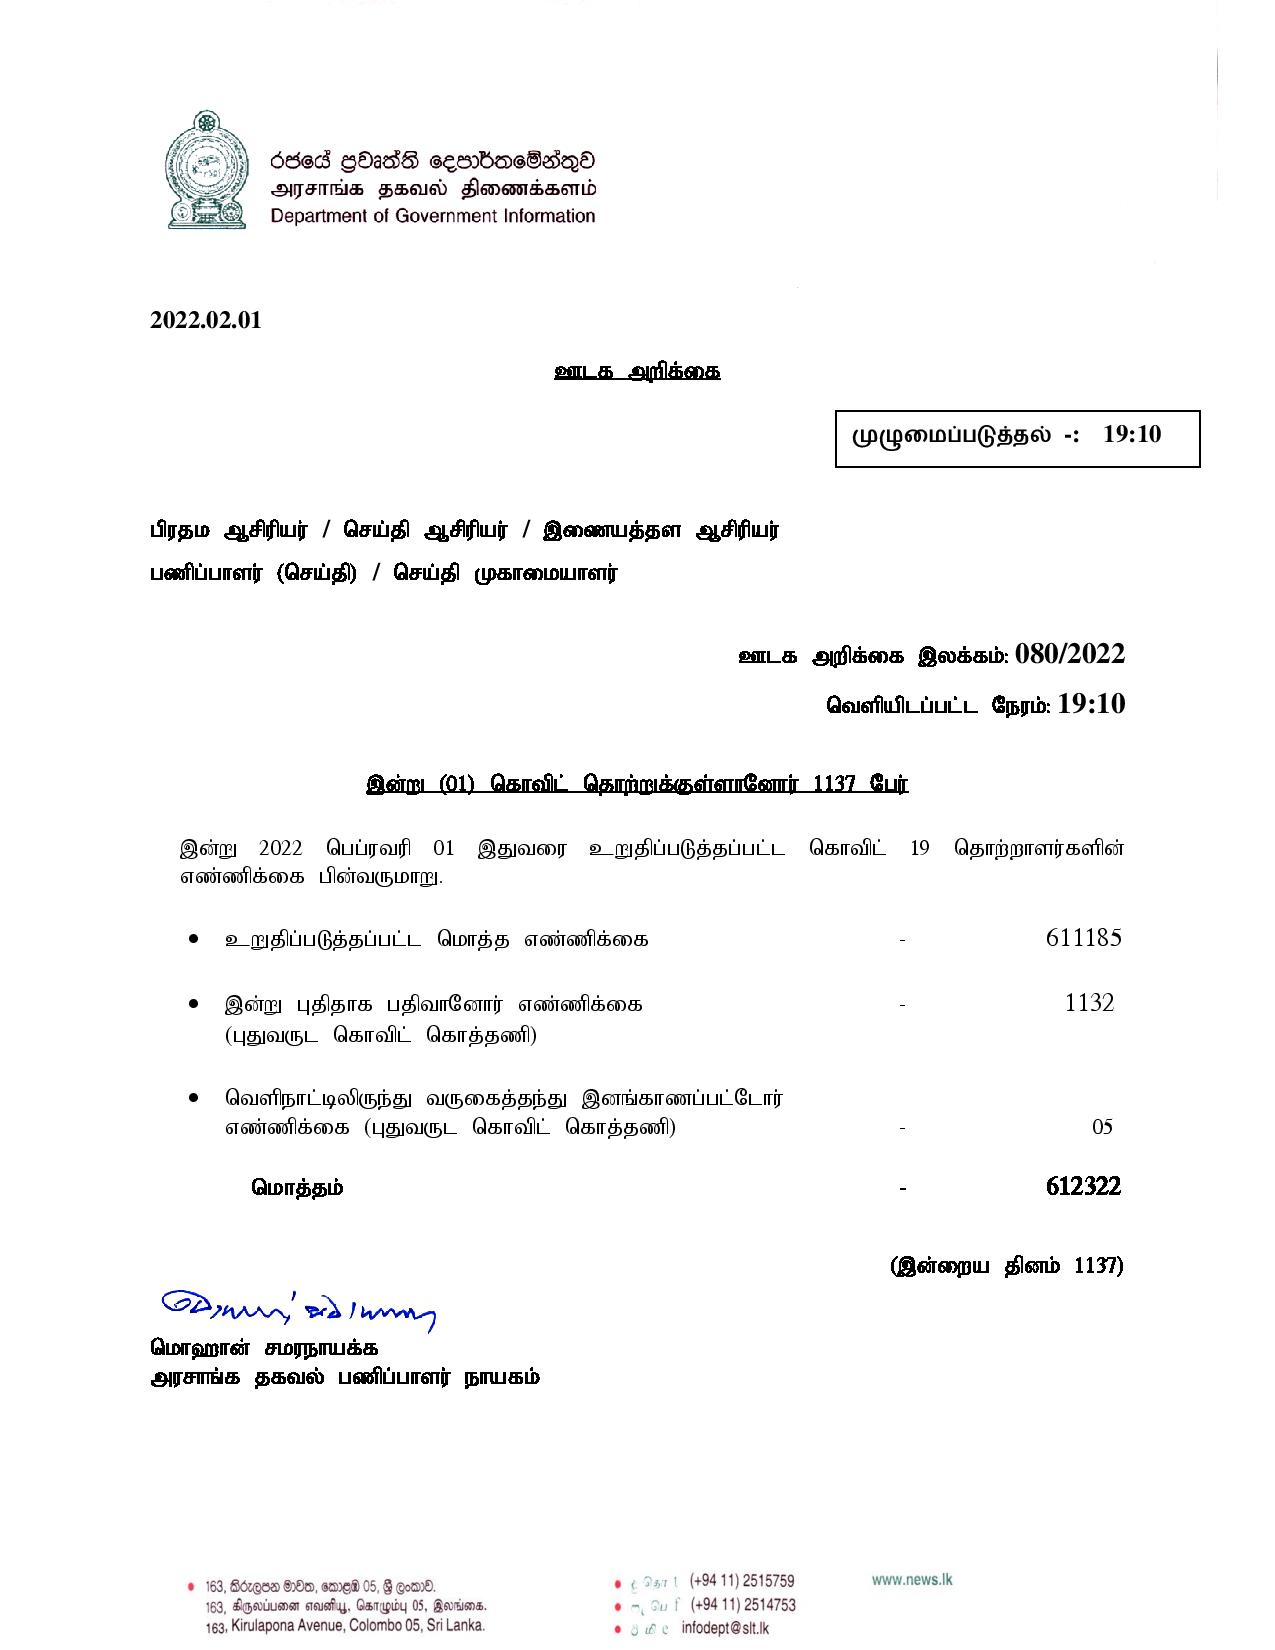 Press Release 80 Tamil page 001